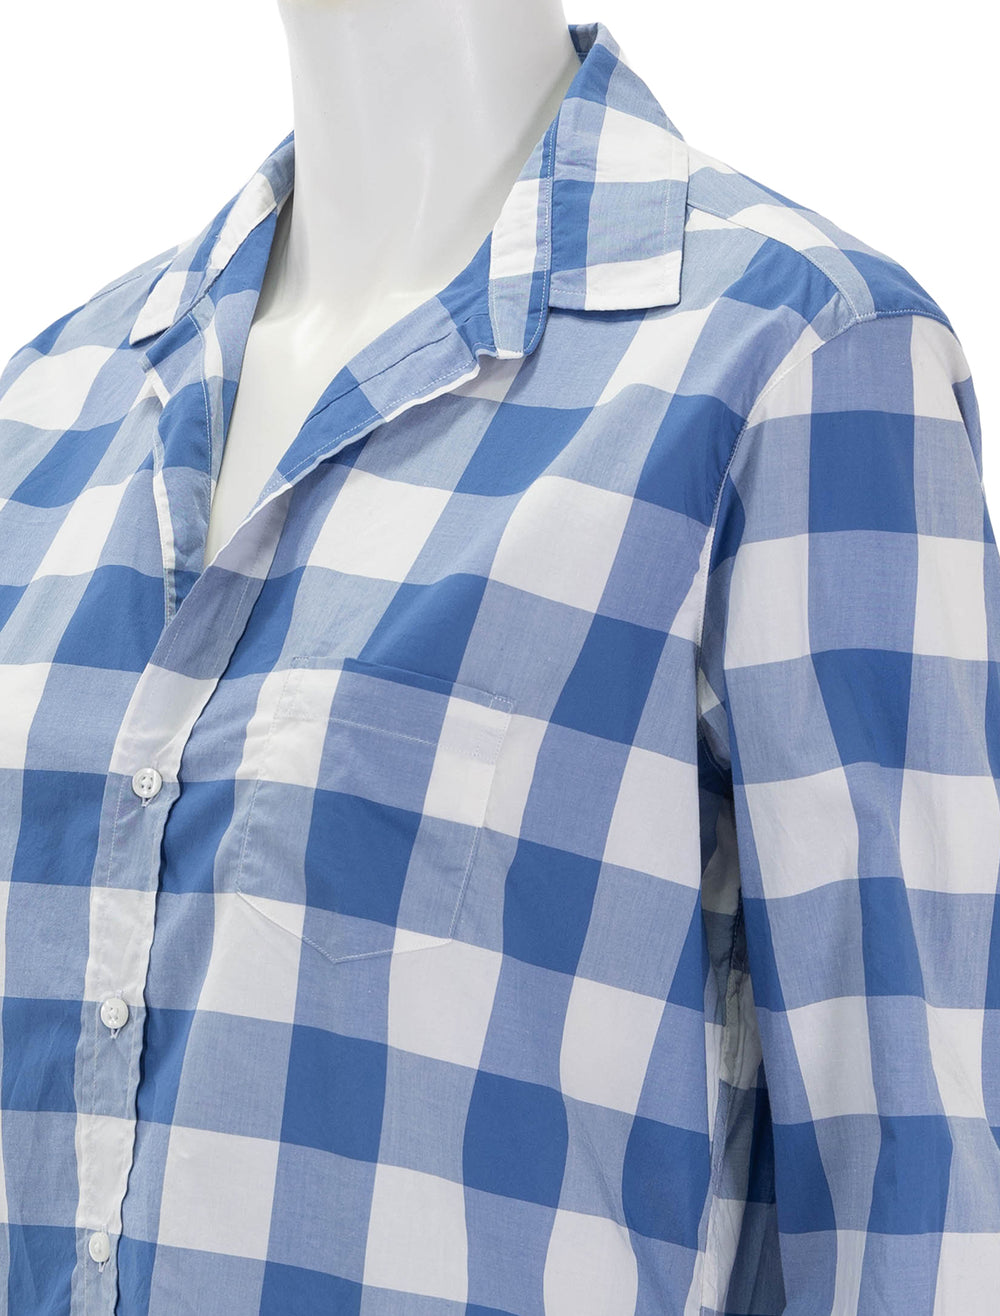 Close-up view of Frank & Eileen's eileen in x large blue white check.